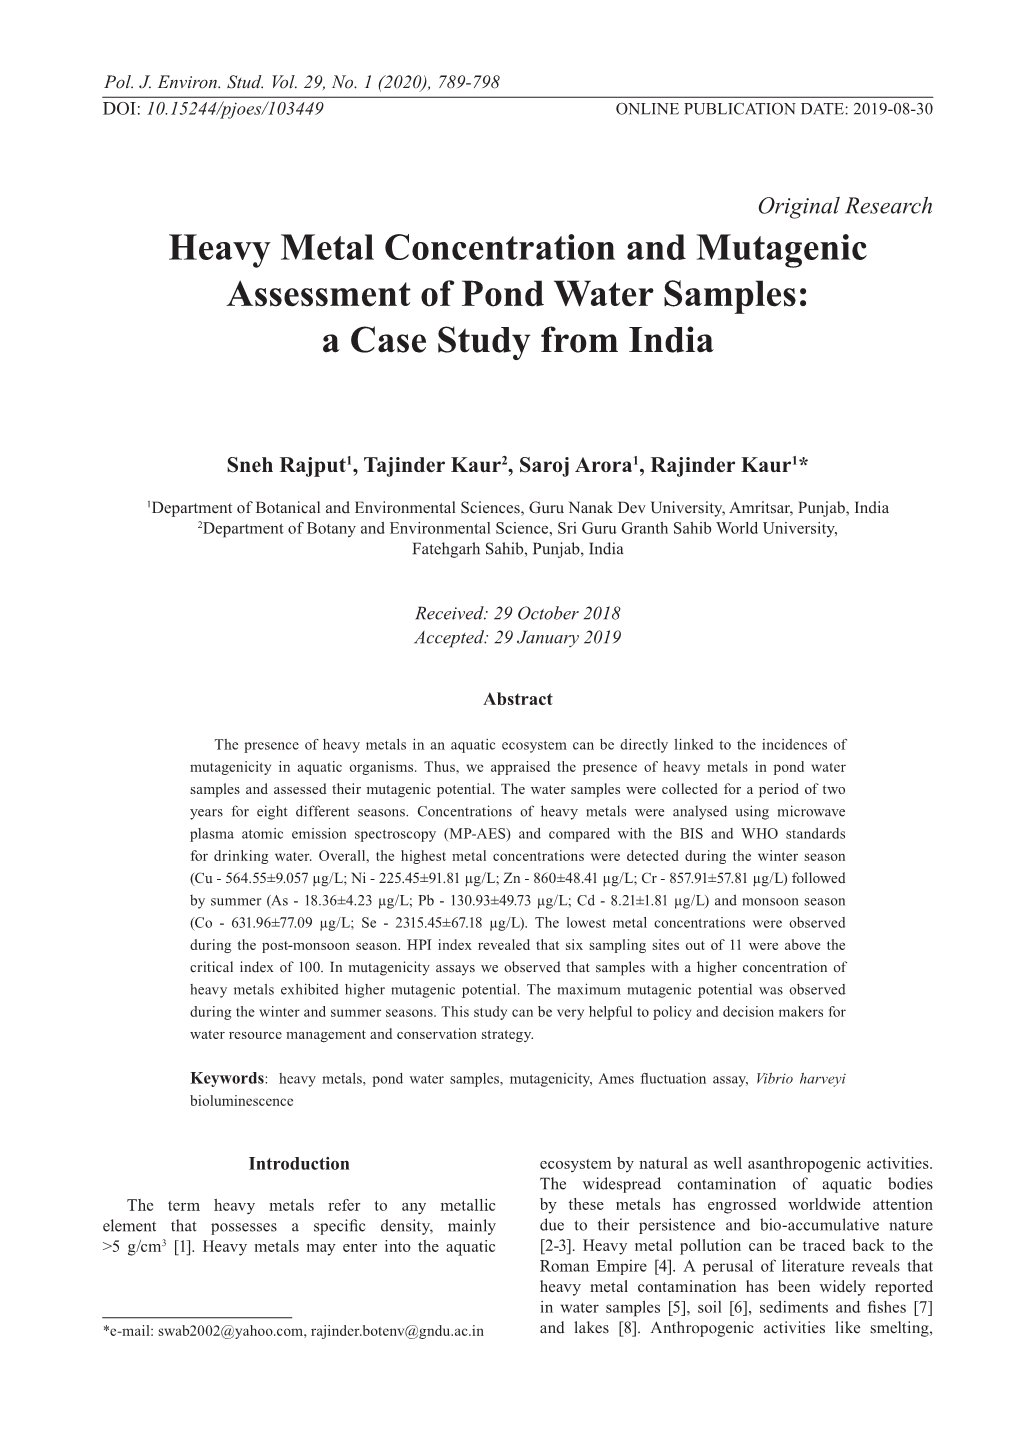 Heavy Metal Concentration and Mutagenic Assessment of Pond Water Samples: a Case Study from India